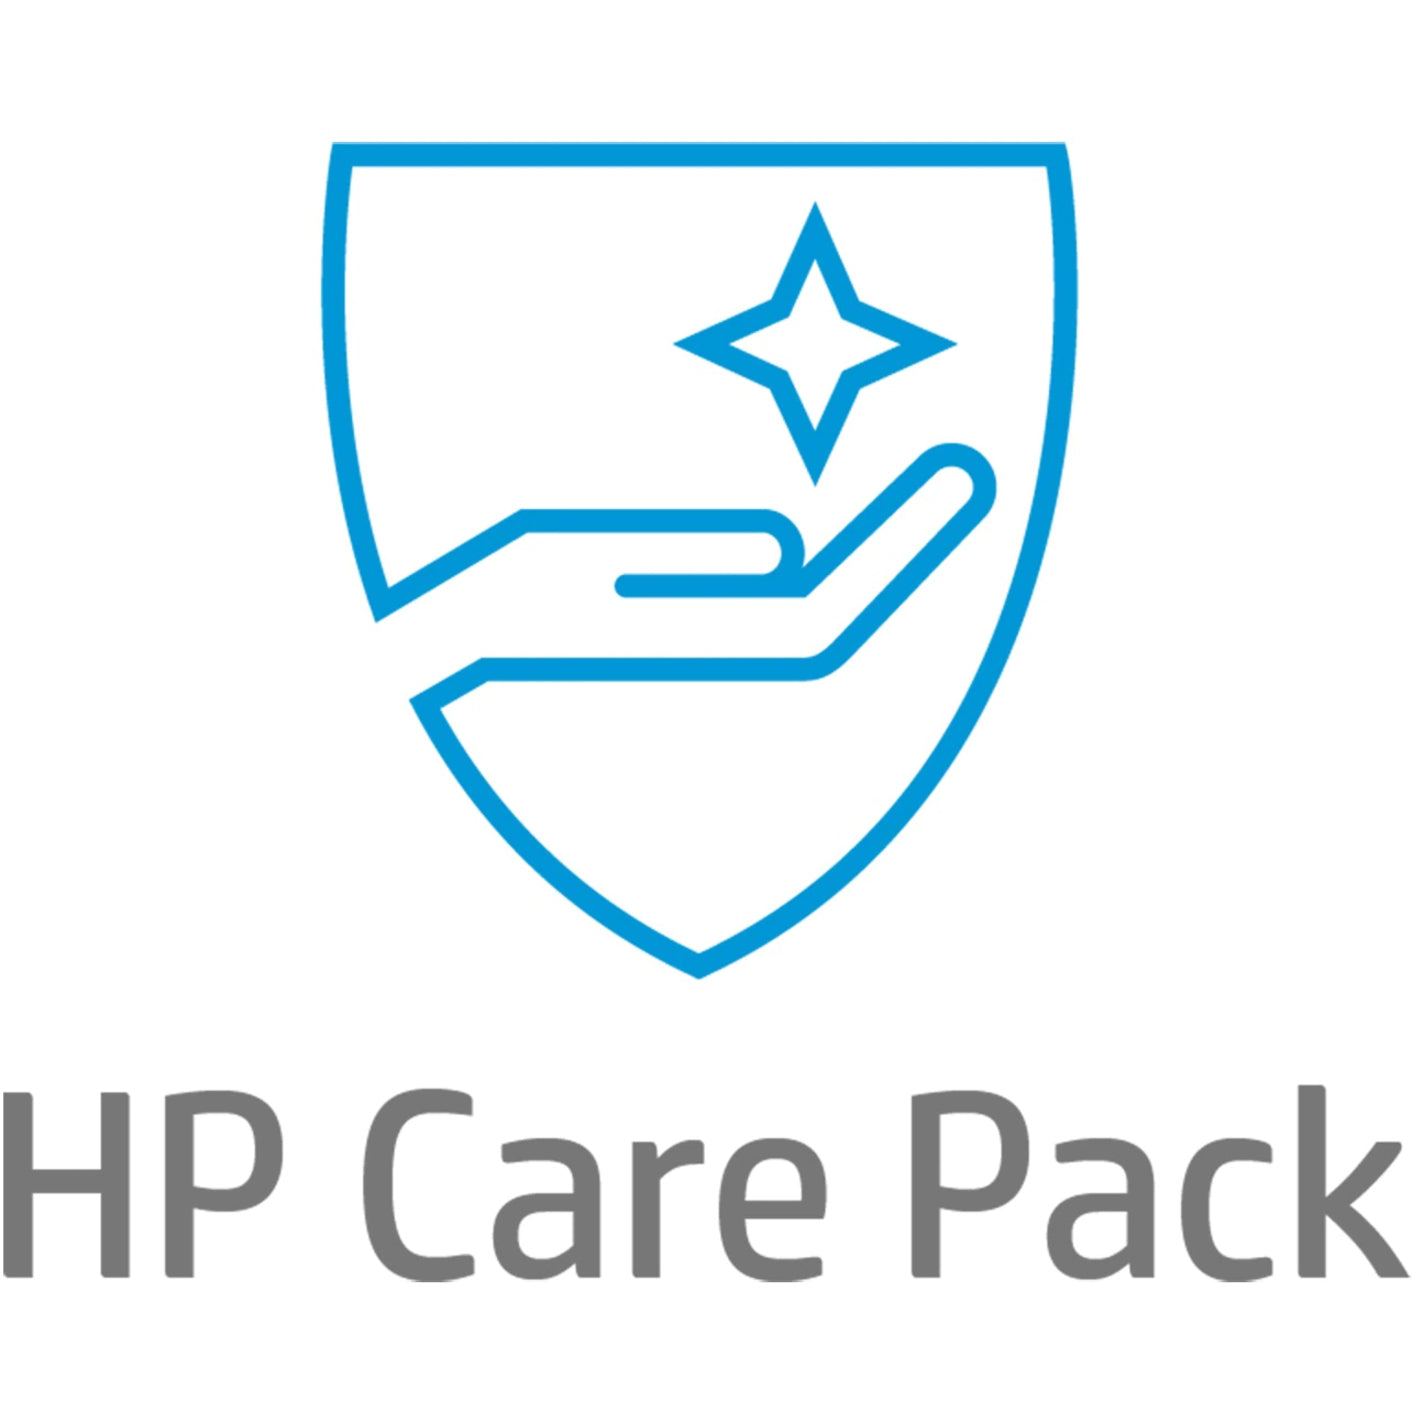 HP Care Pack - Extended Warranty - 4 Year - Warranty (UA6H0E)